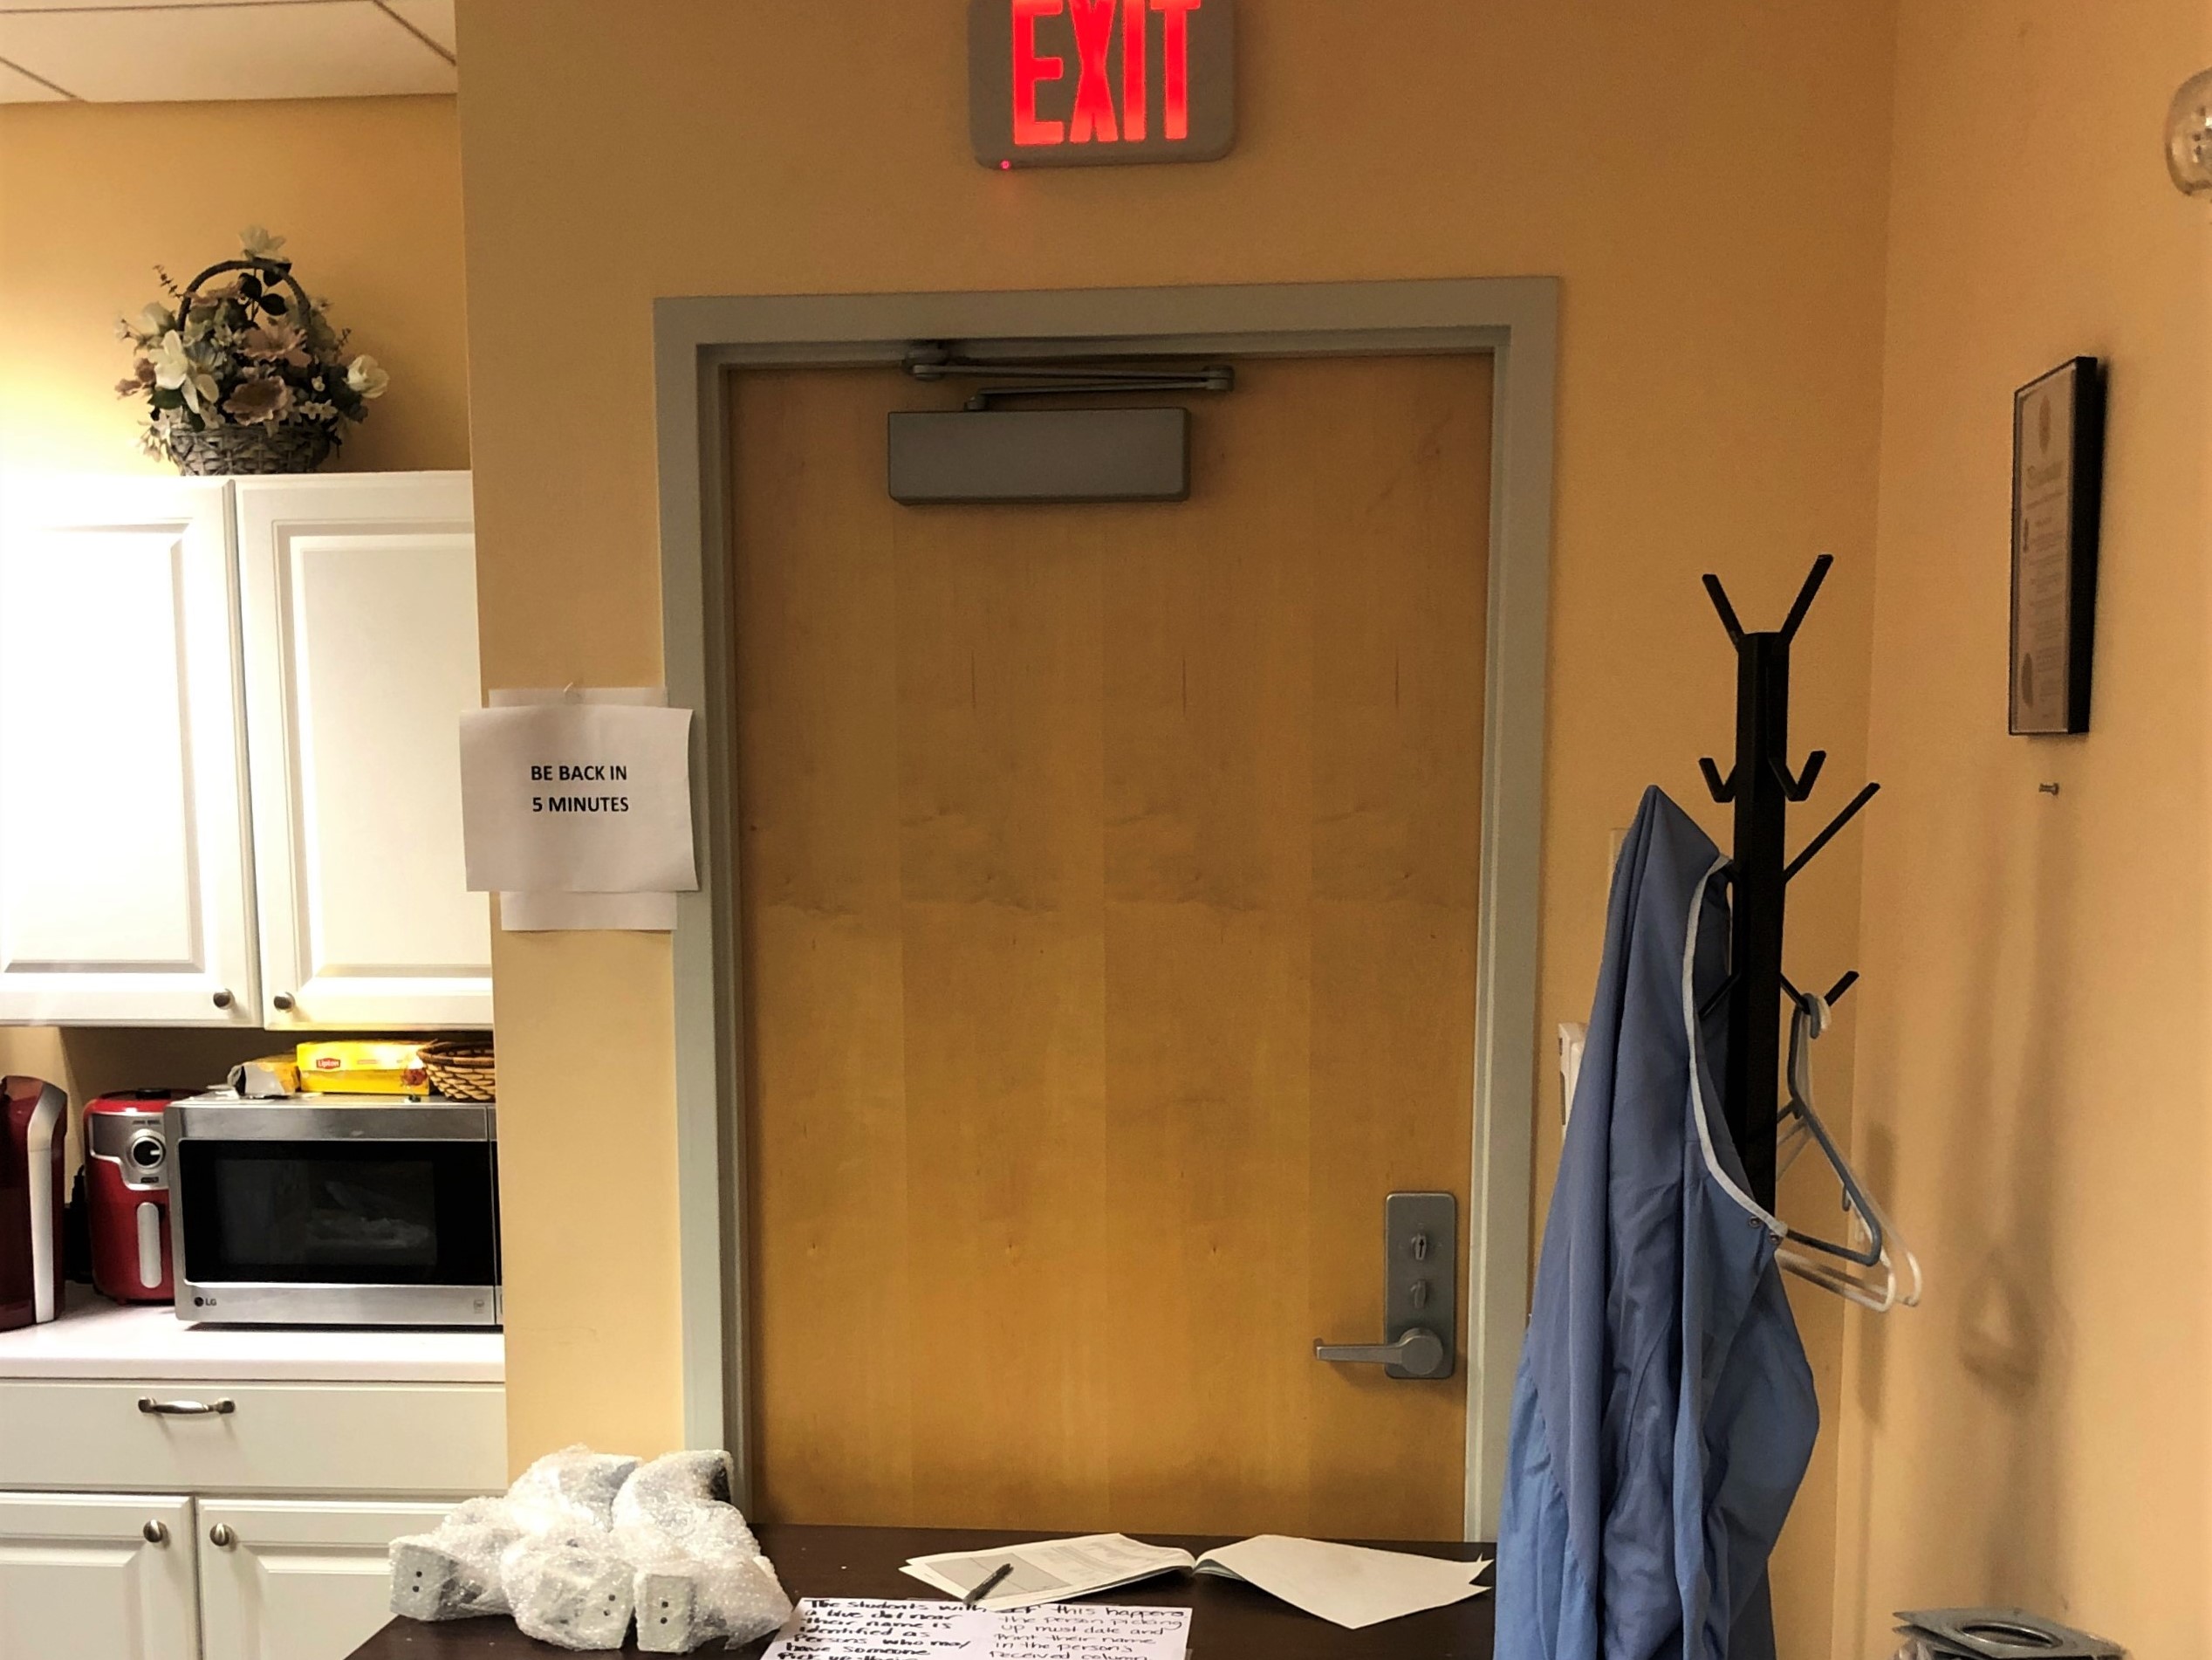 A table blocking a door marked as an exit.